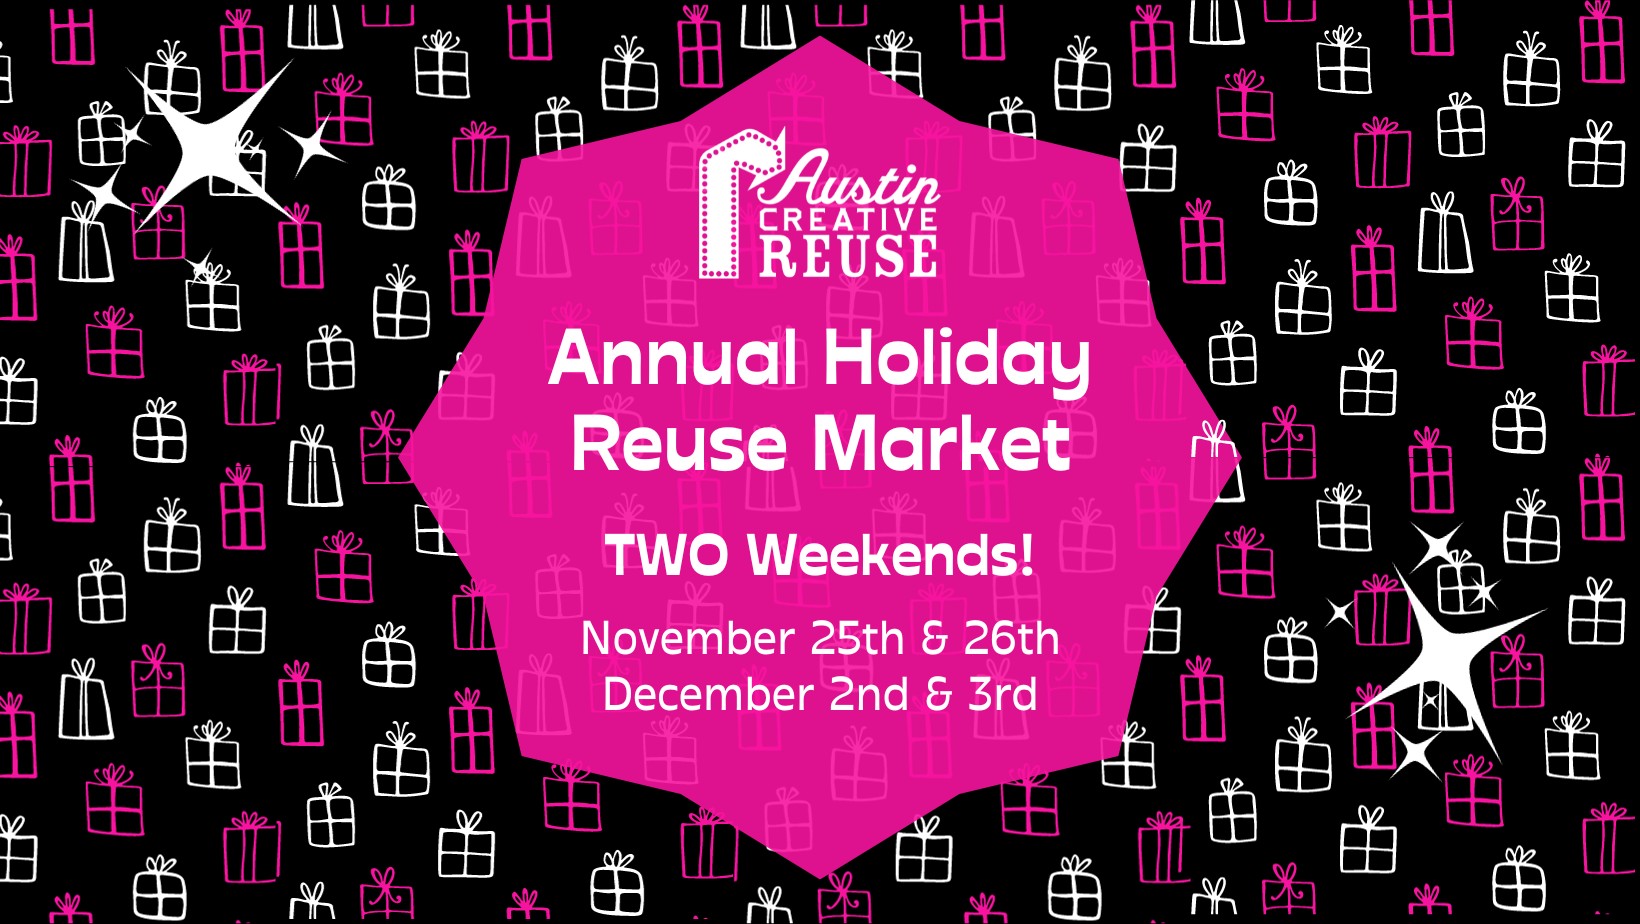 Annual Holiday Reuse Market